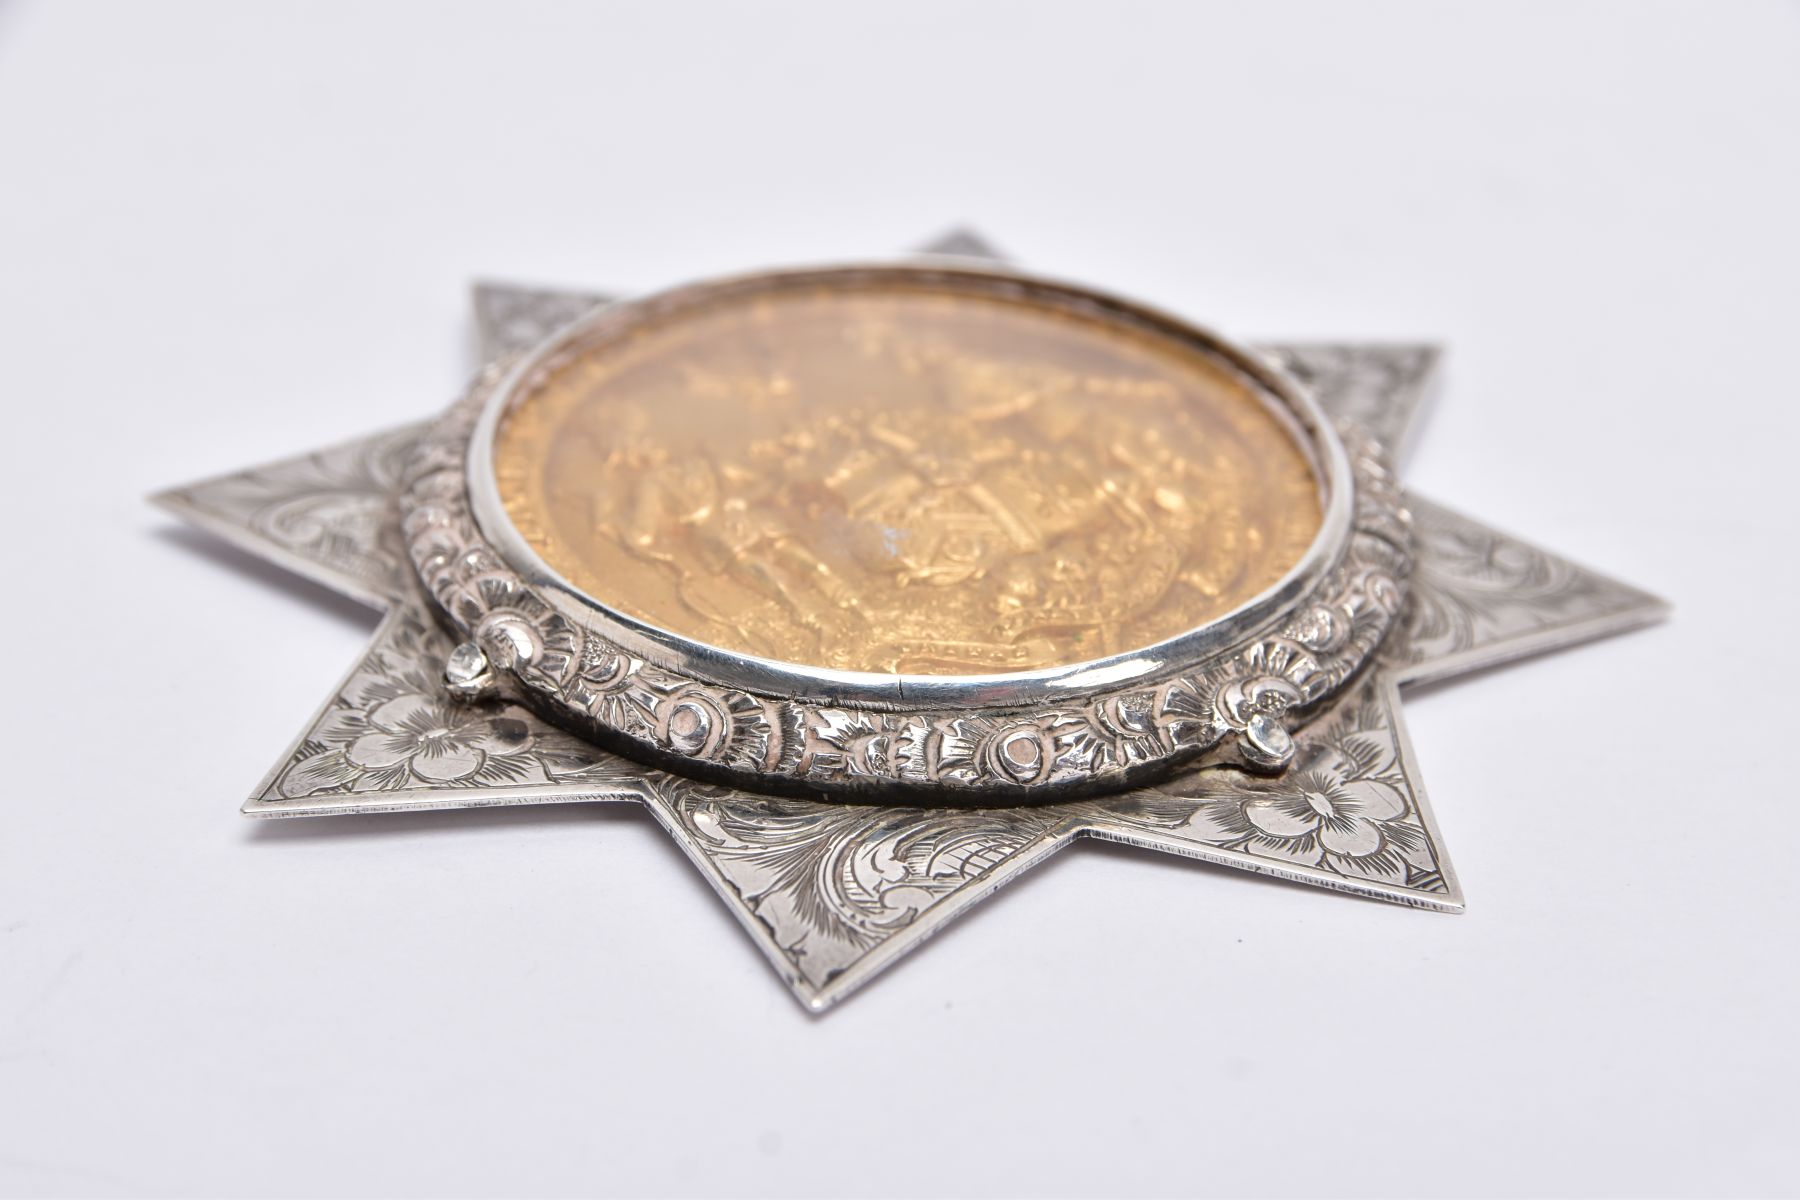 A MID VICTORIAN SILVER CHIEF RANGERS MASONIC MEDAL, star form with an engraved floral design, set - Image 5 of 6